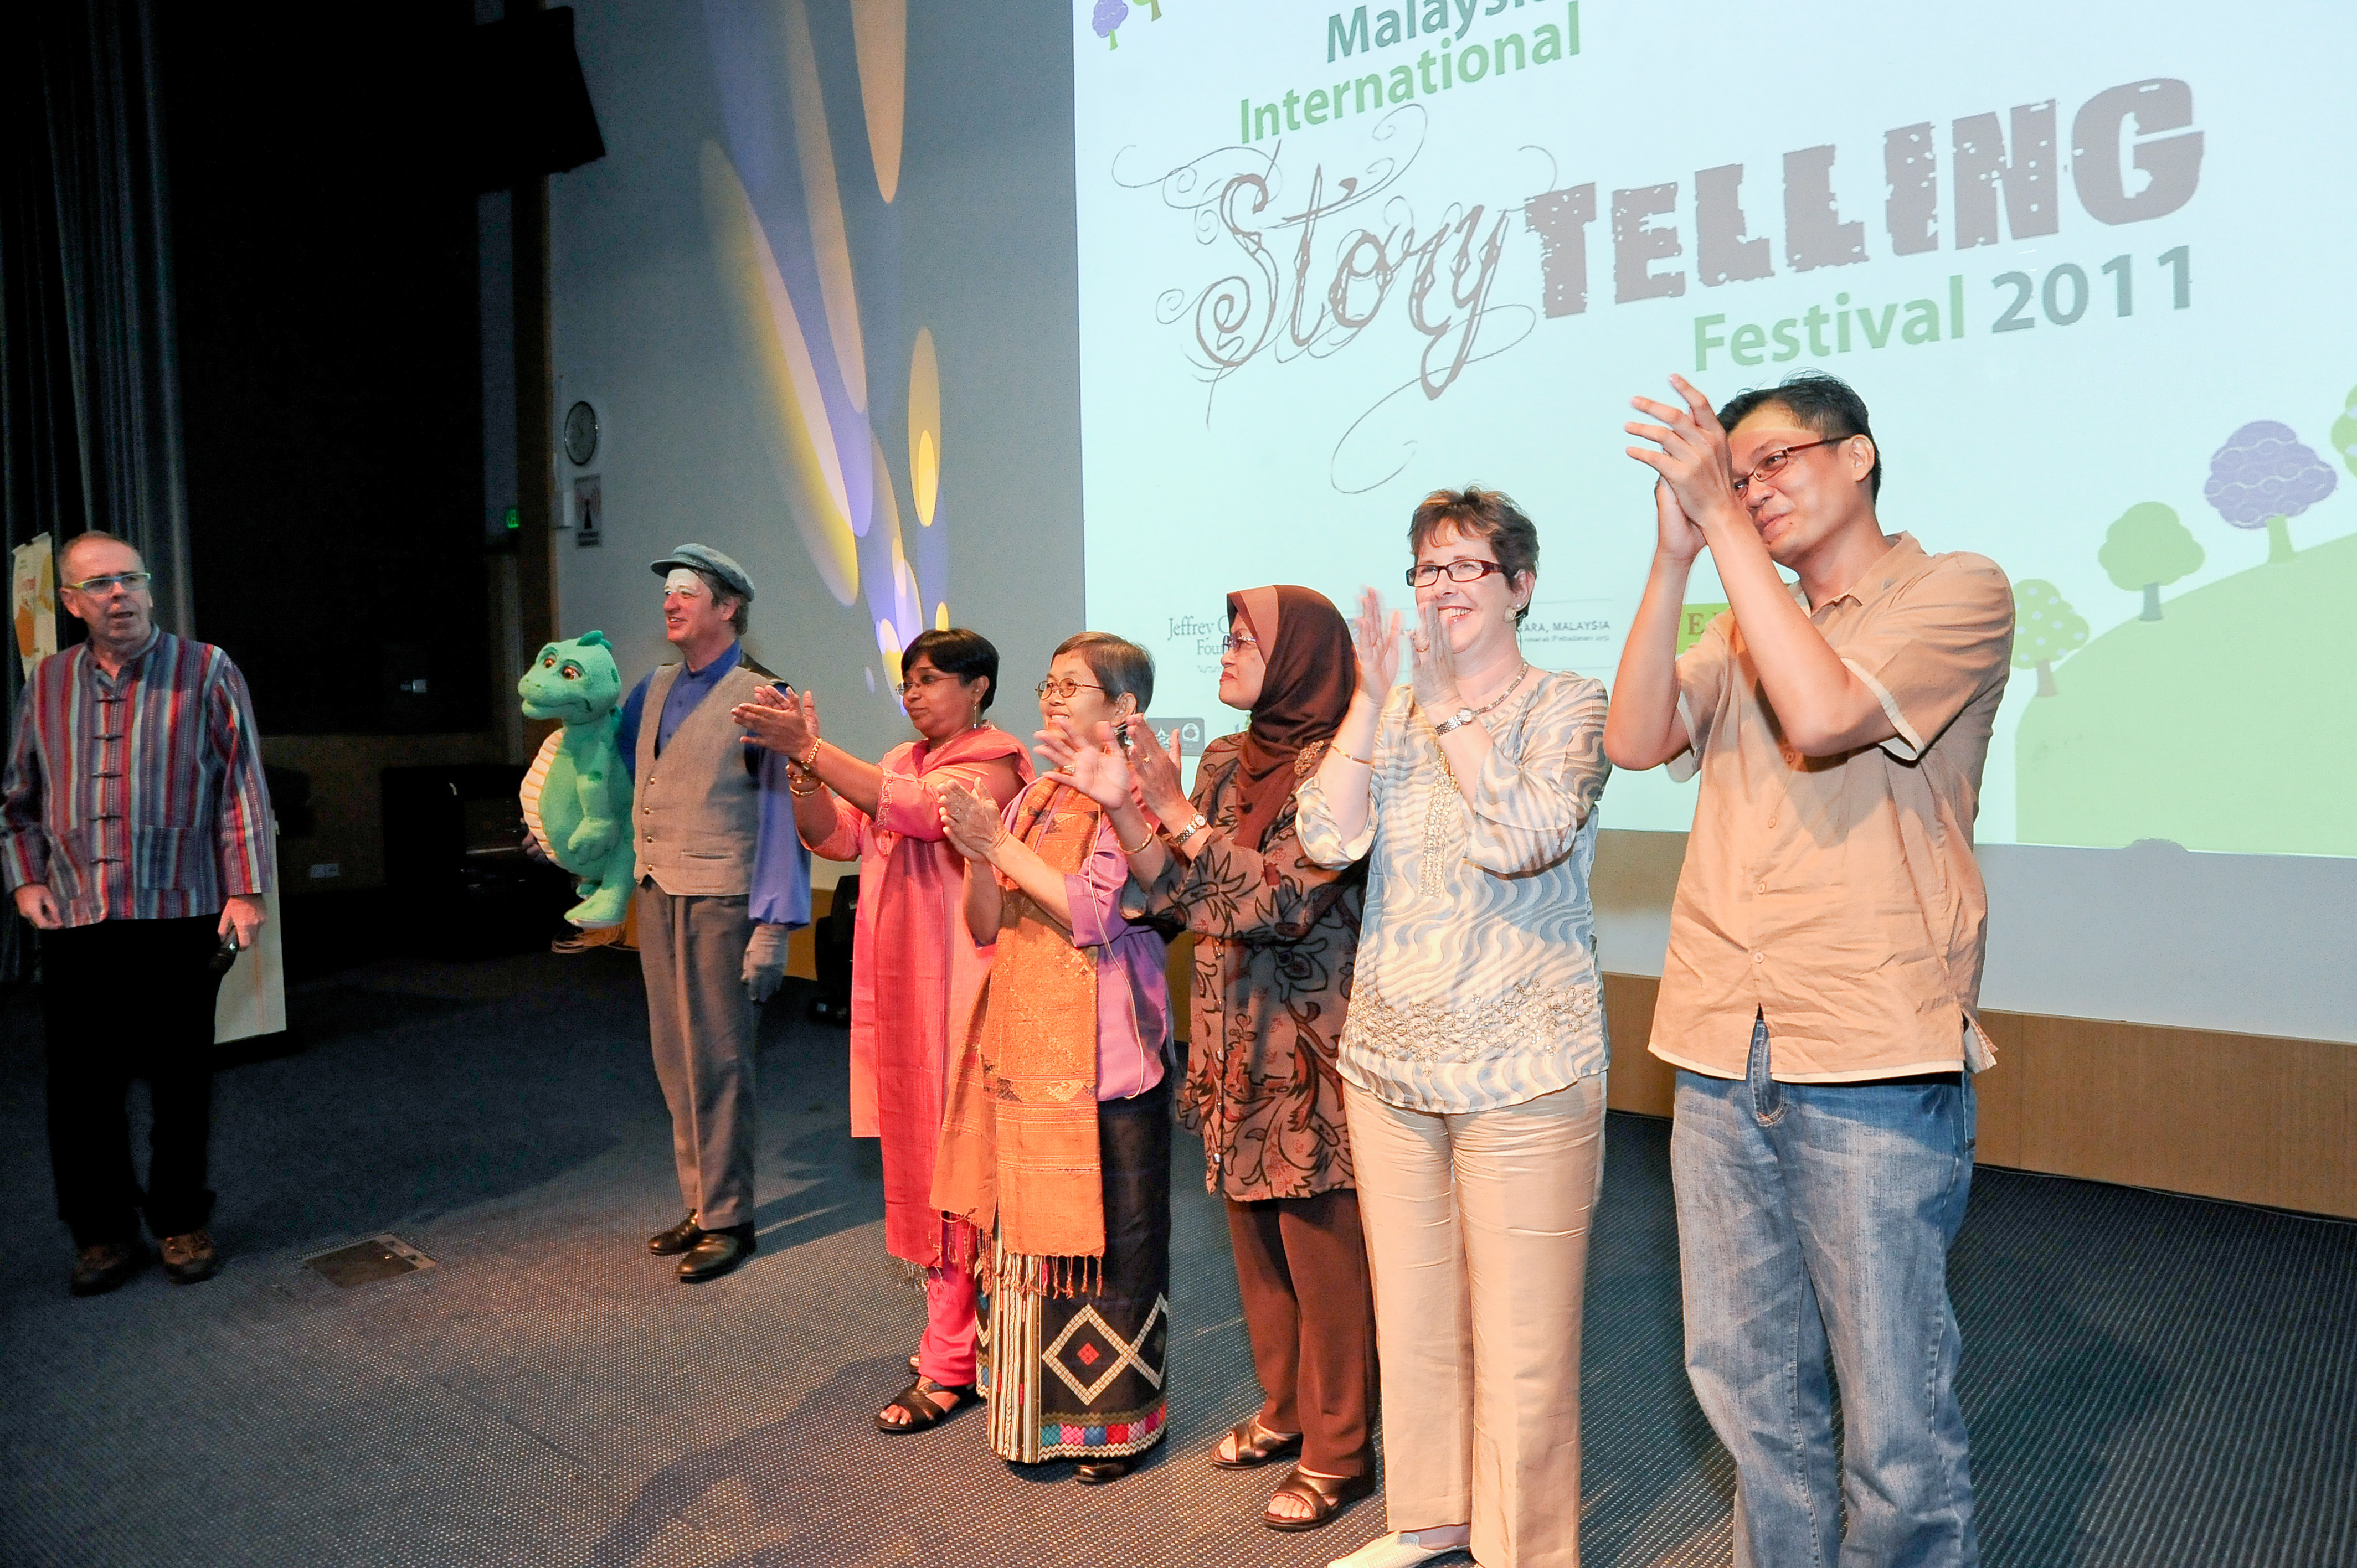 misf-with-all-the-international-tellers-at-the-showcase